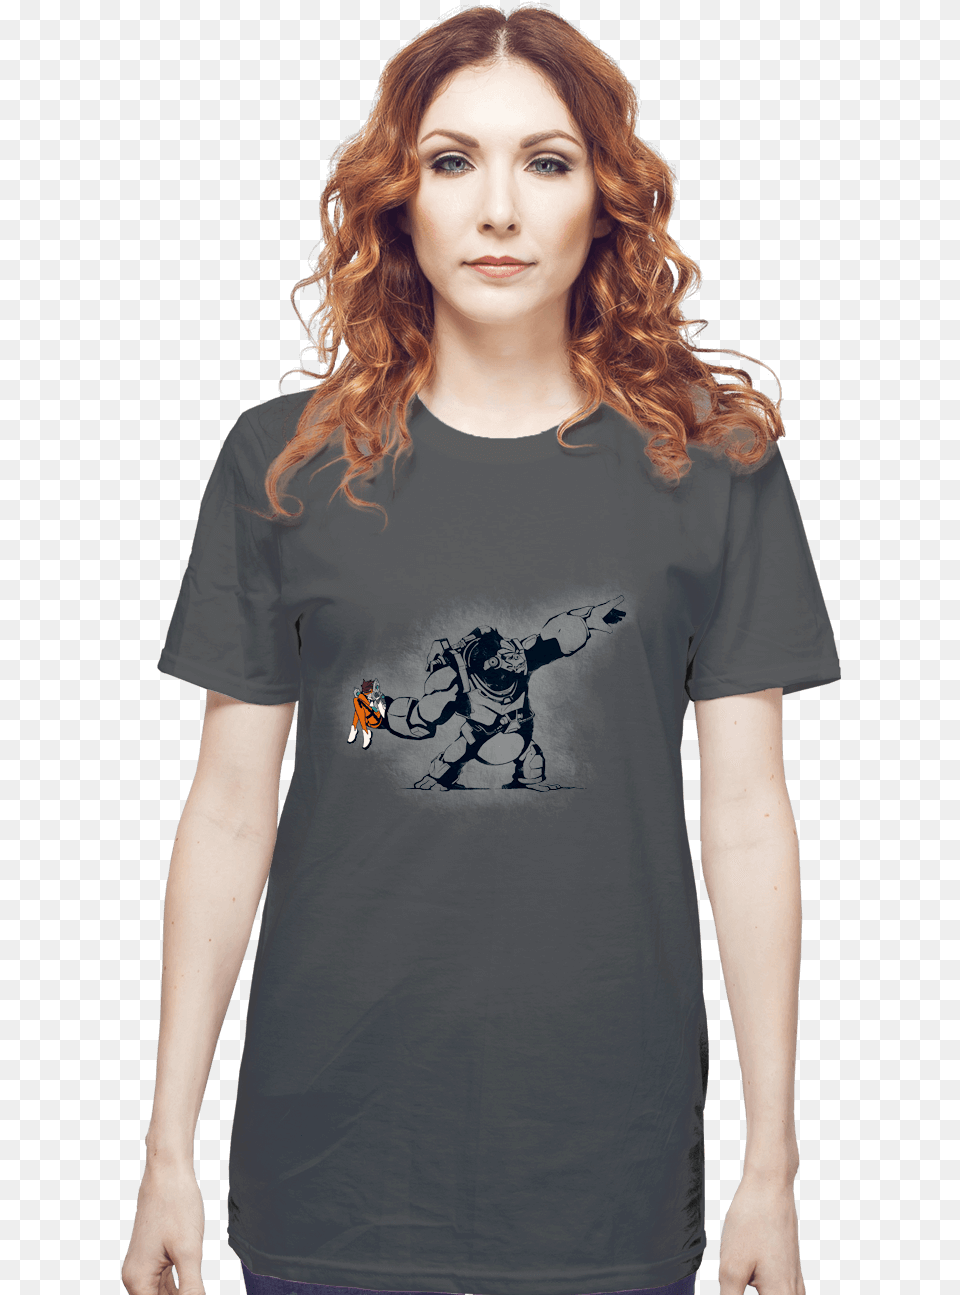 Banksy Overwatch Shirt, Clothing, T-shirt, Adult, Person Png Image